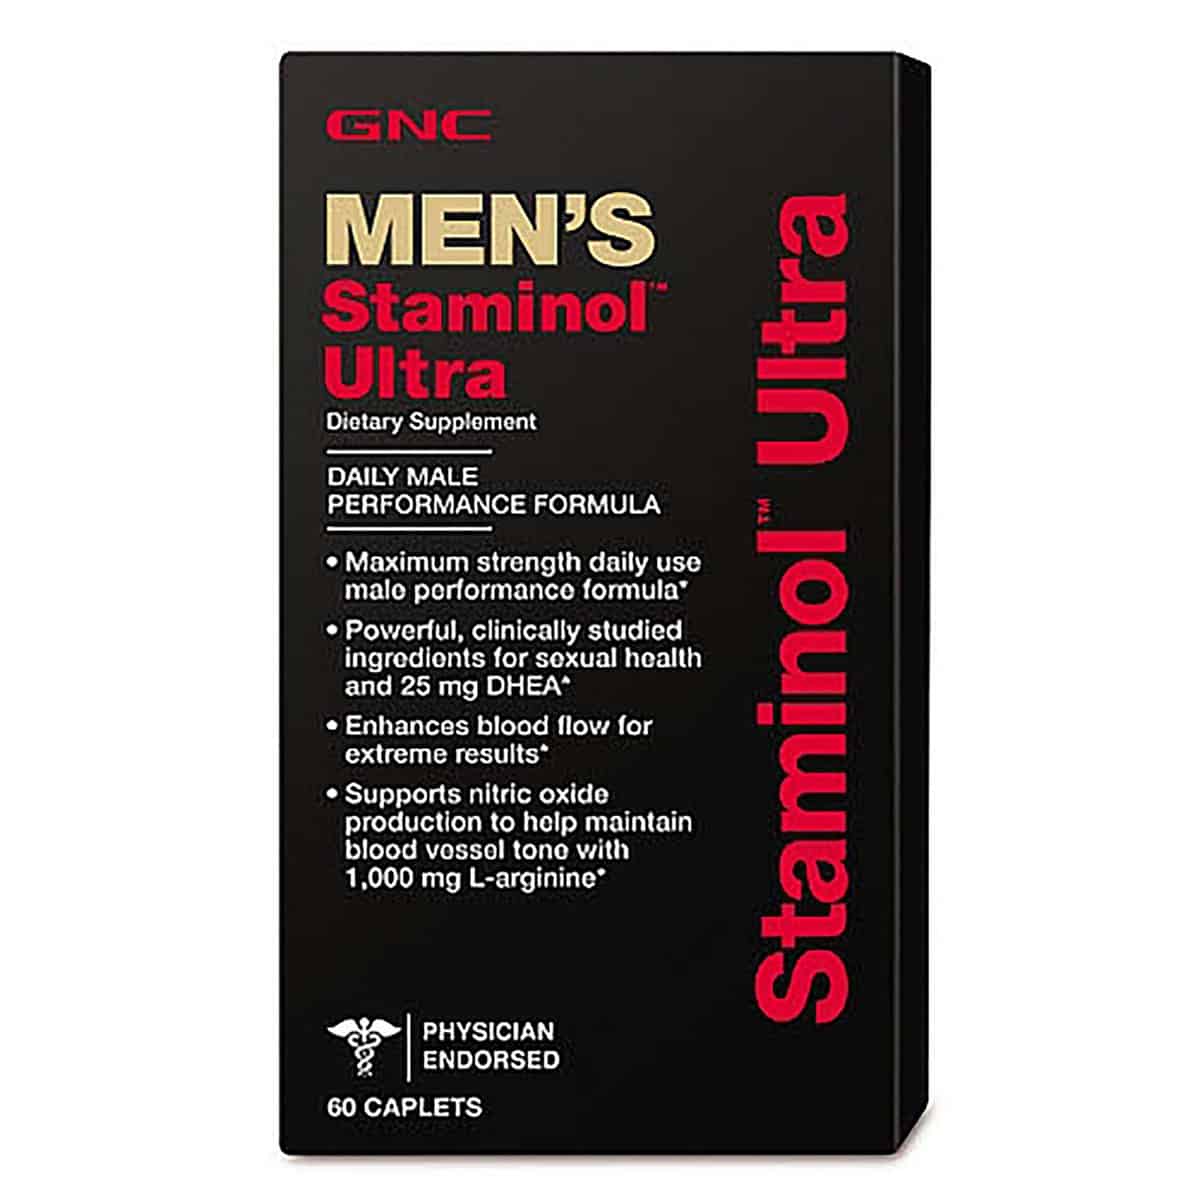 Gnc Staminol Ultra Reviews for Men Side Effects & Benefits!